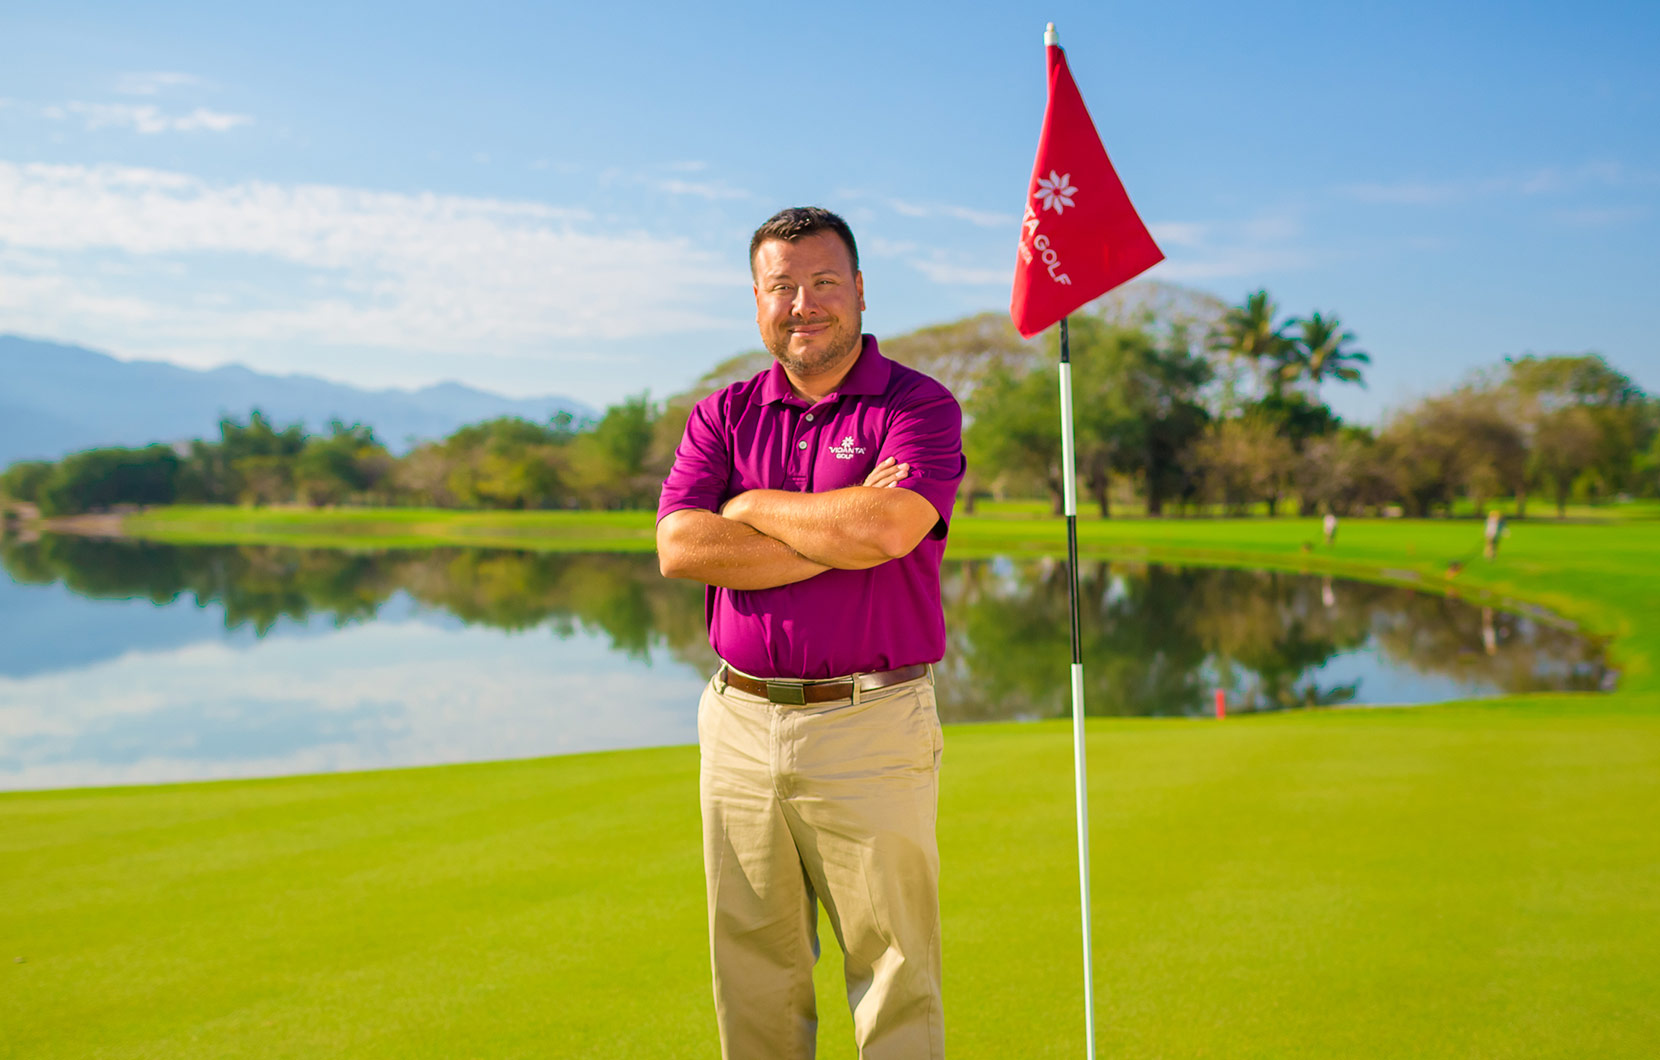 Shane has been caring for the courses at Vidanta Golf for the last year and a half.